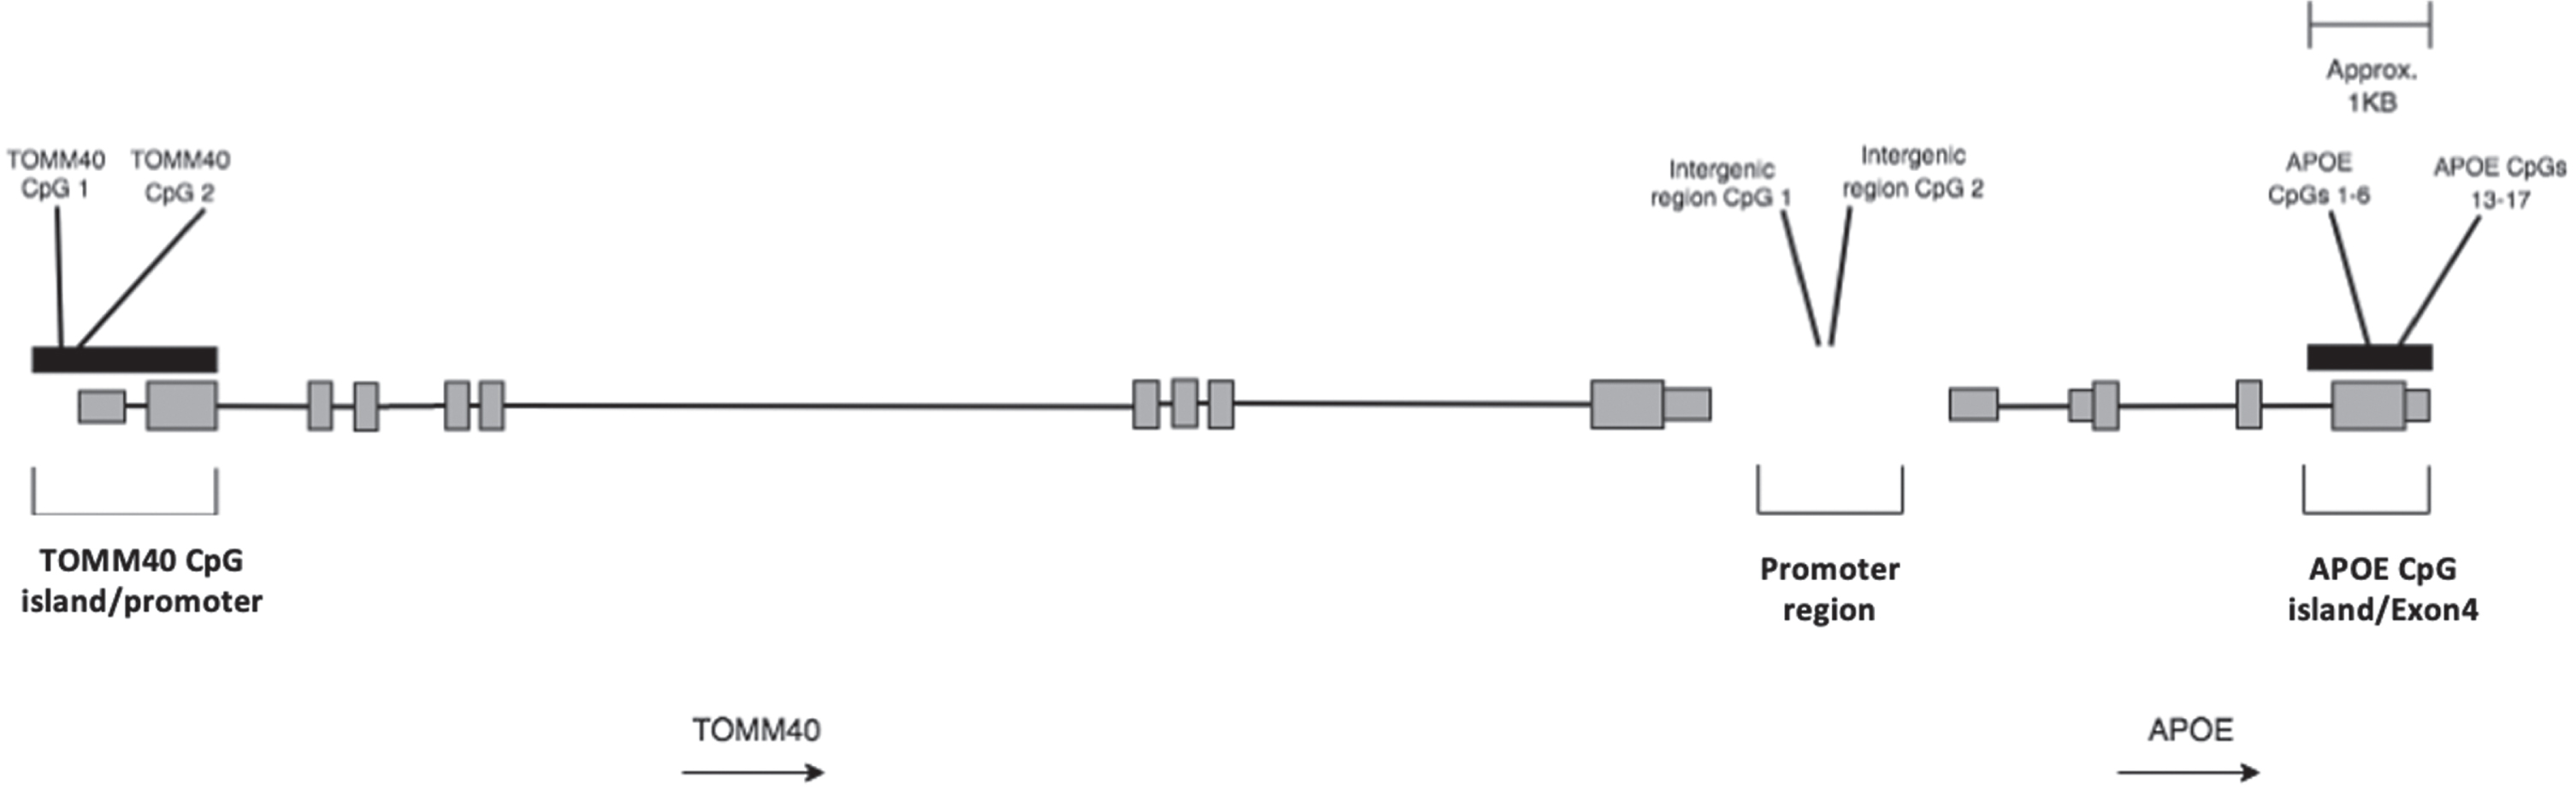 Schematic representation of TOMM40-APOE locus showing approximate locations of the regions investigated in this study. Black bars represent CpG islands. Grey bars represent gene exons. Transcription of the genes occurs from left to right as shown by arrows.